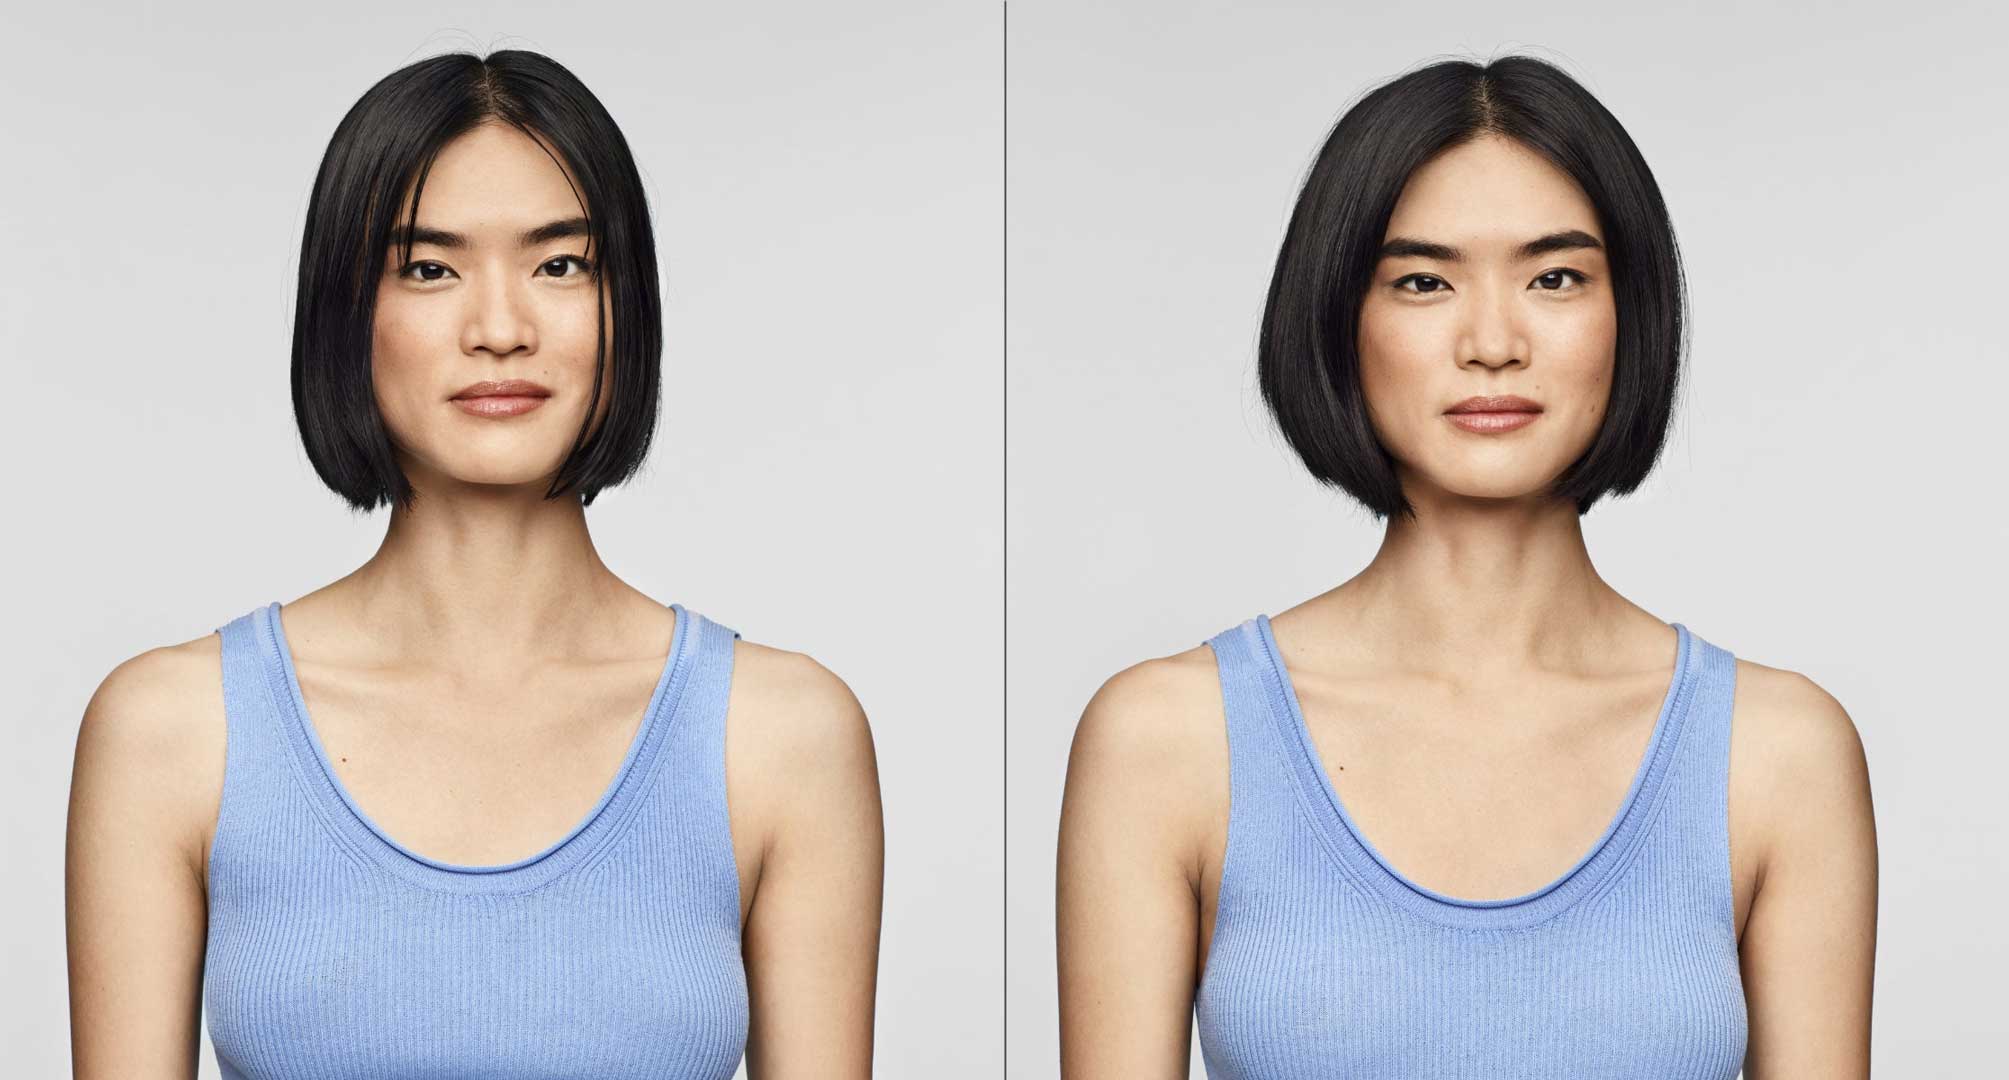 Before and after image of a woman with short, greasy black hair on the left and clean hair on the right. 